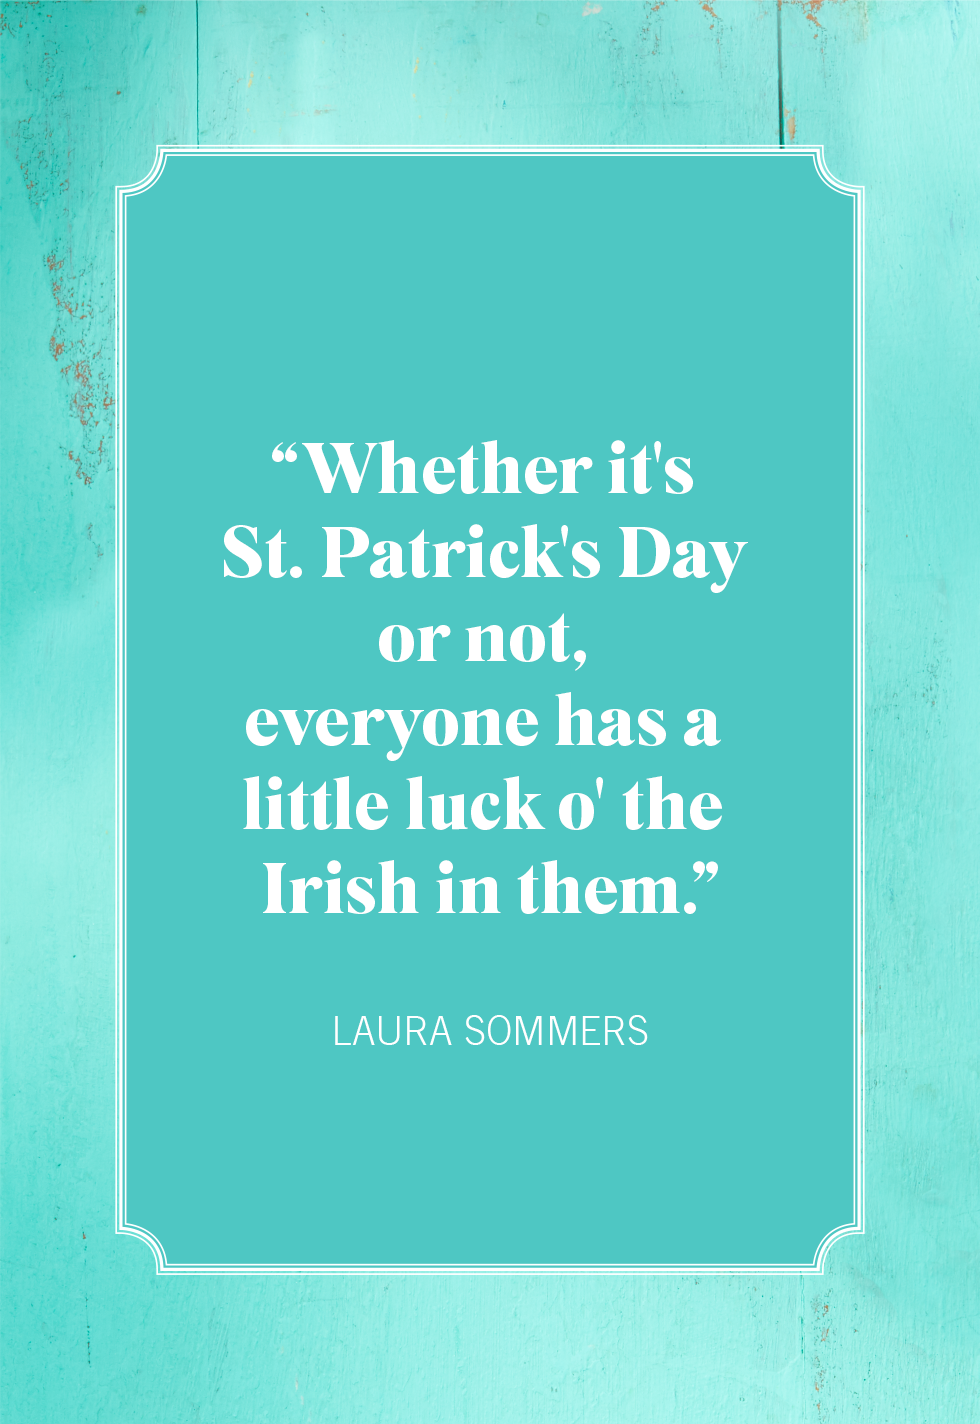 Quotes About Good Luck For St. Patrick's Day 2020